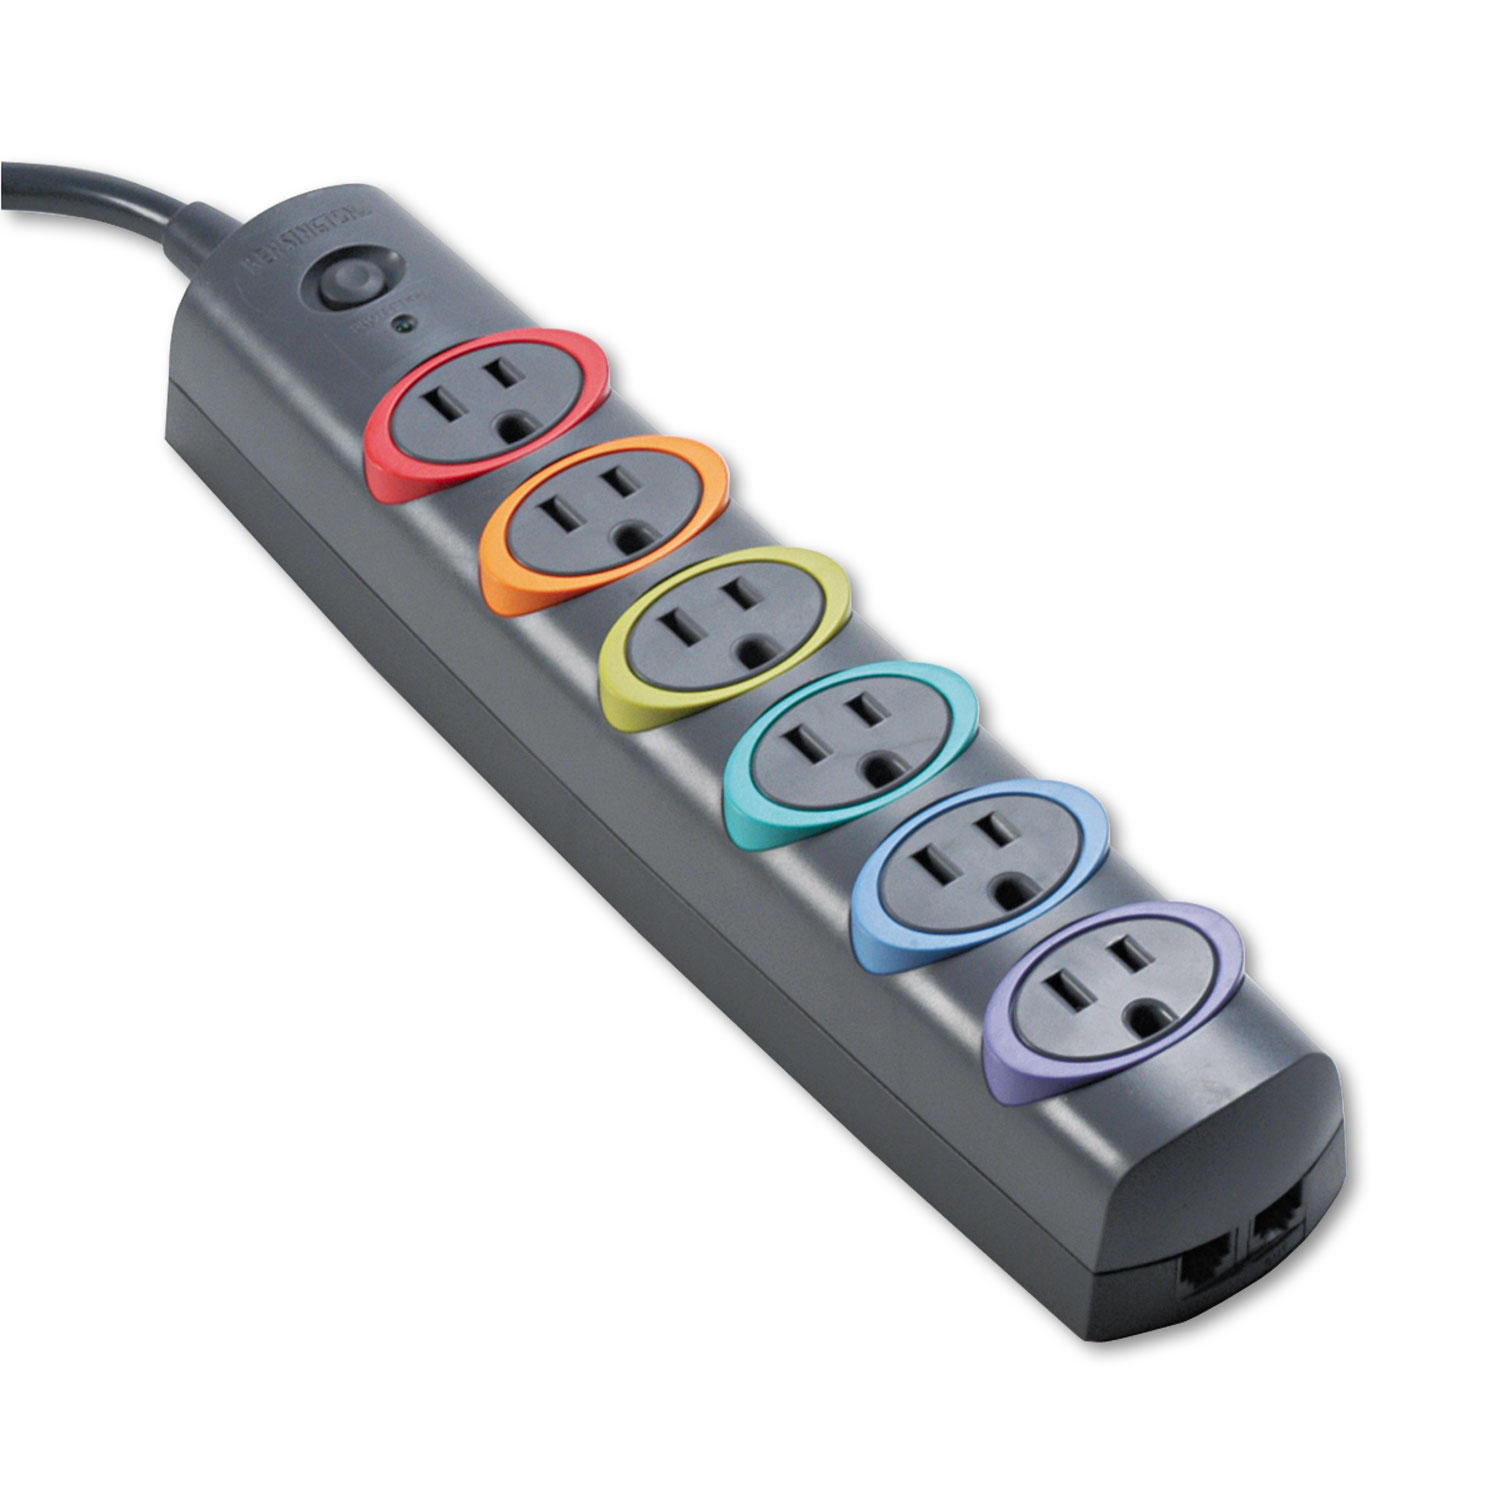 SmartSockets Color-Coded Strip Surge Protector, 6 Outlets, 6 ft Cord, 670 Joules